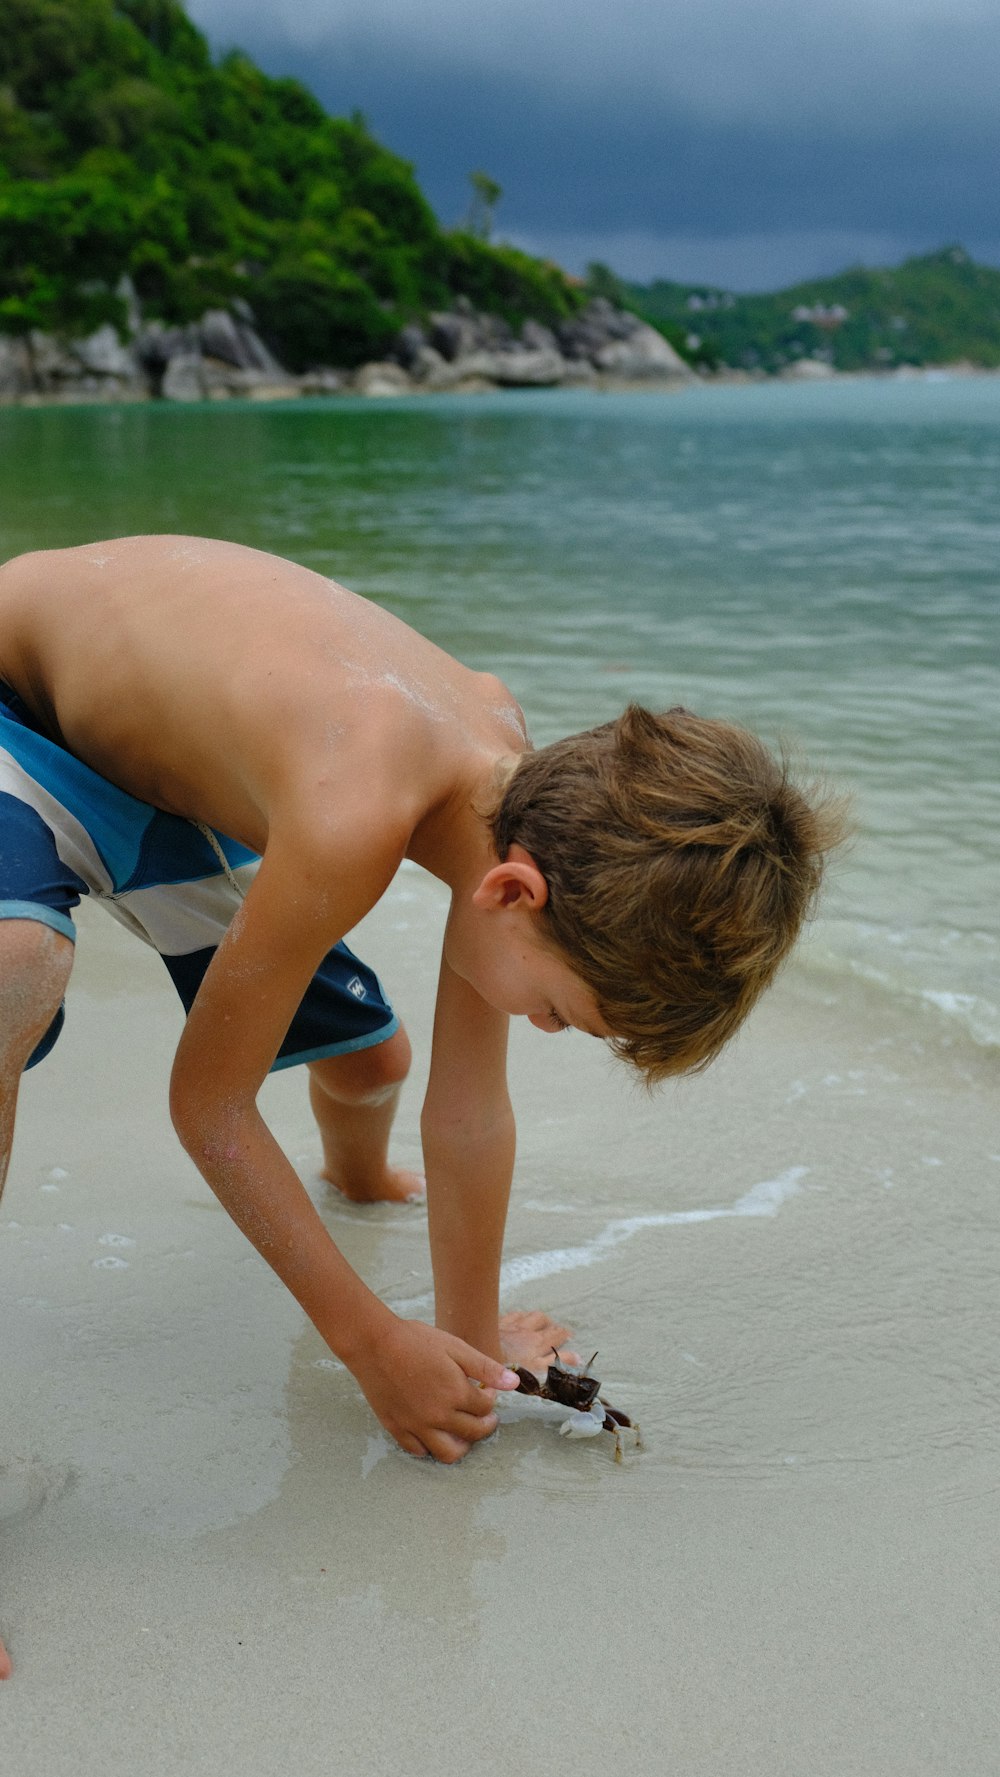 a person playing with a toy on the beach